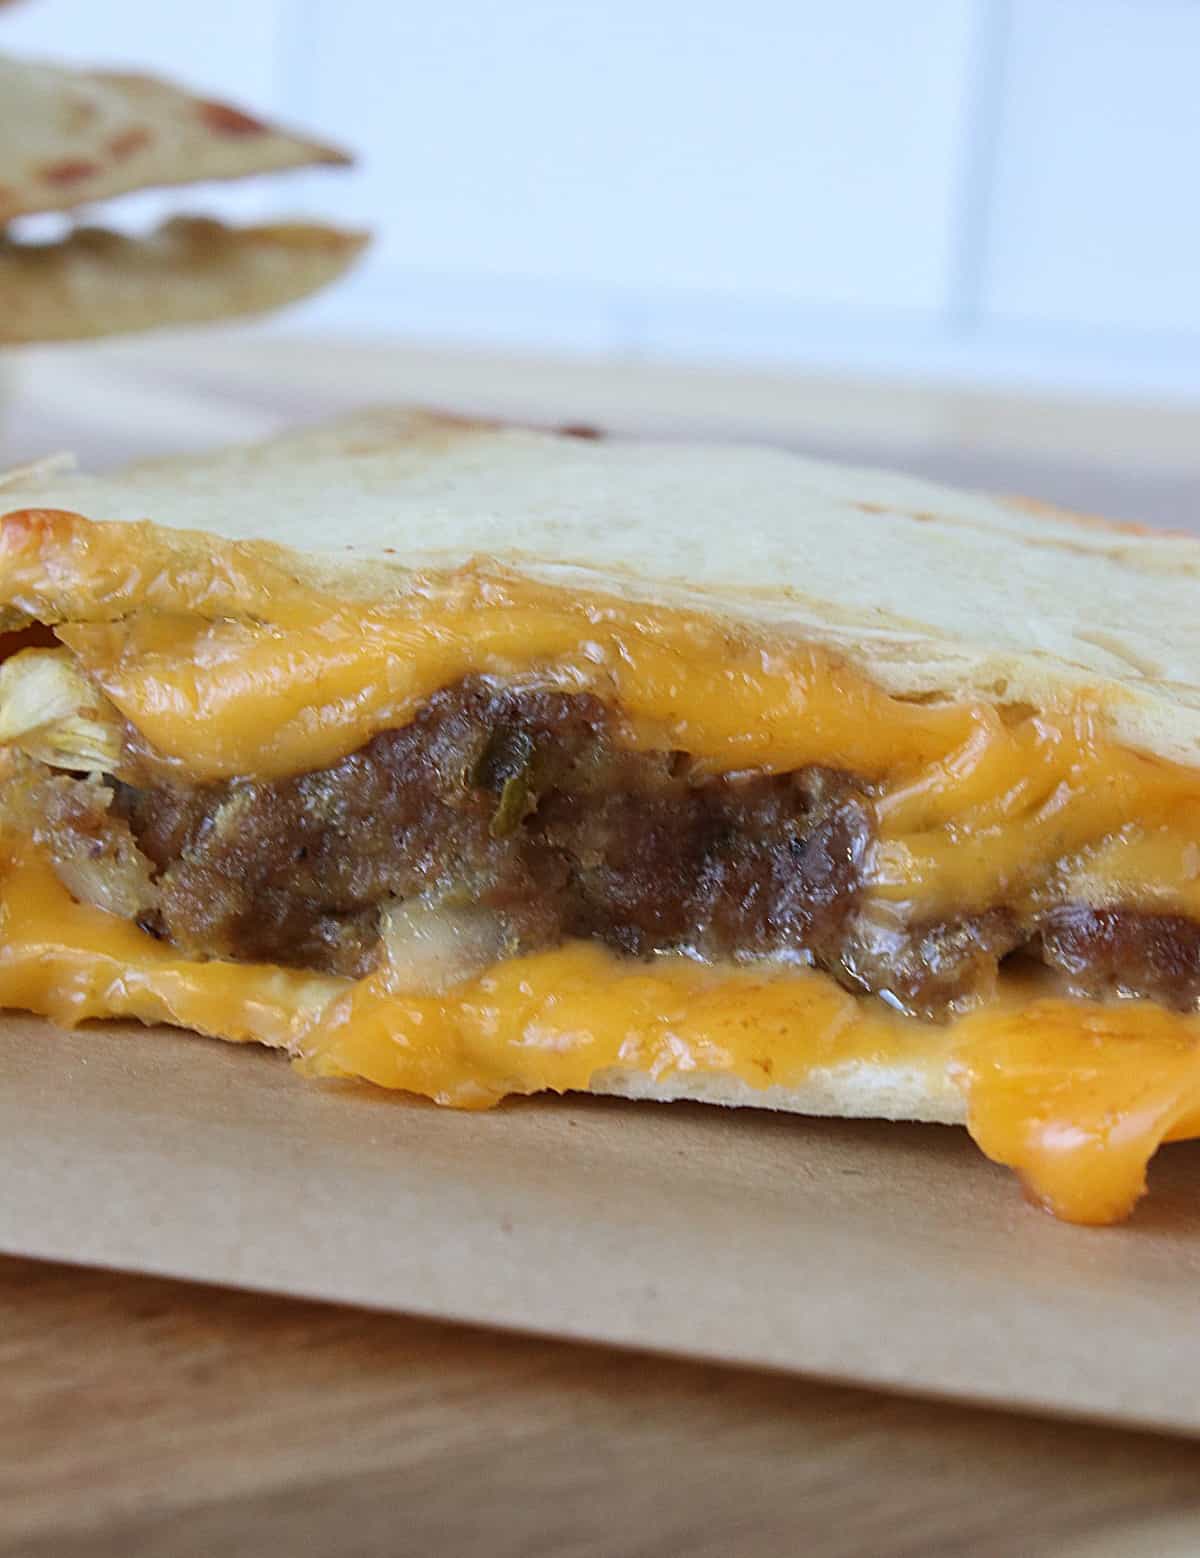 A ground beef burger cooked in a toasted flour tortilla with cheese. 